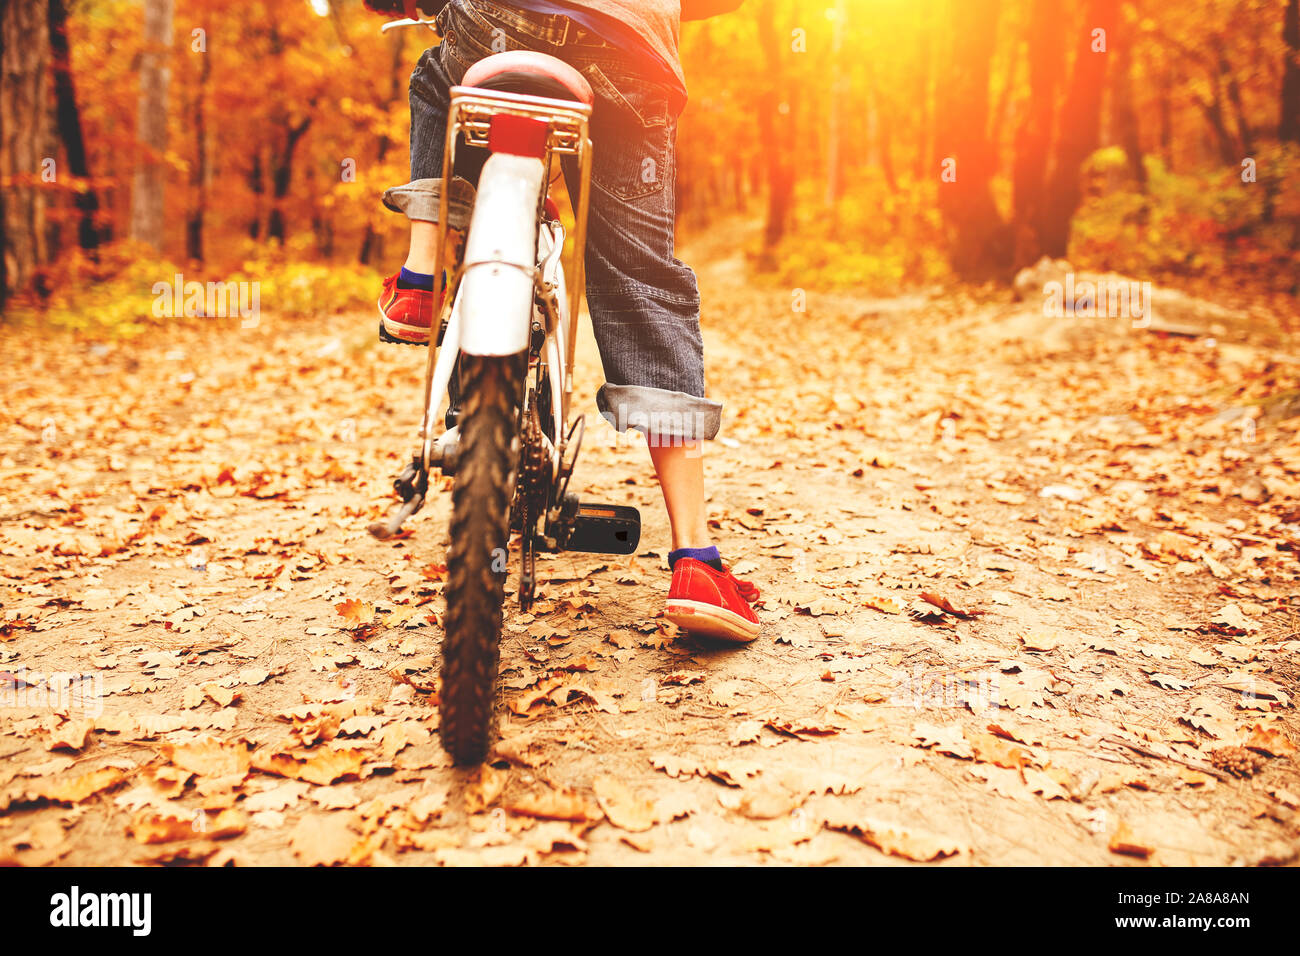 Boy on bike in the forest, child on the bicycle, autumn Stock Photo